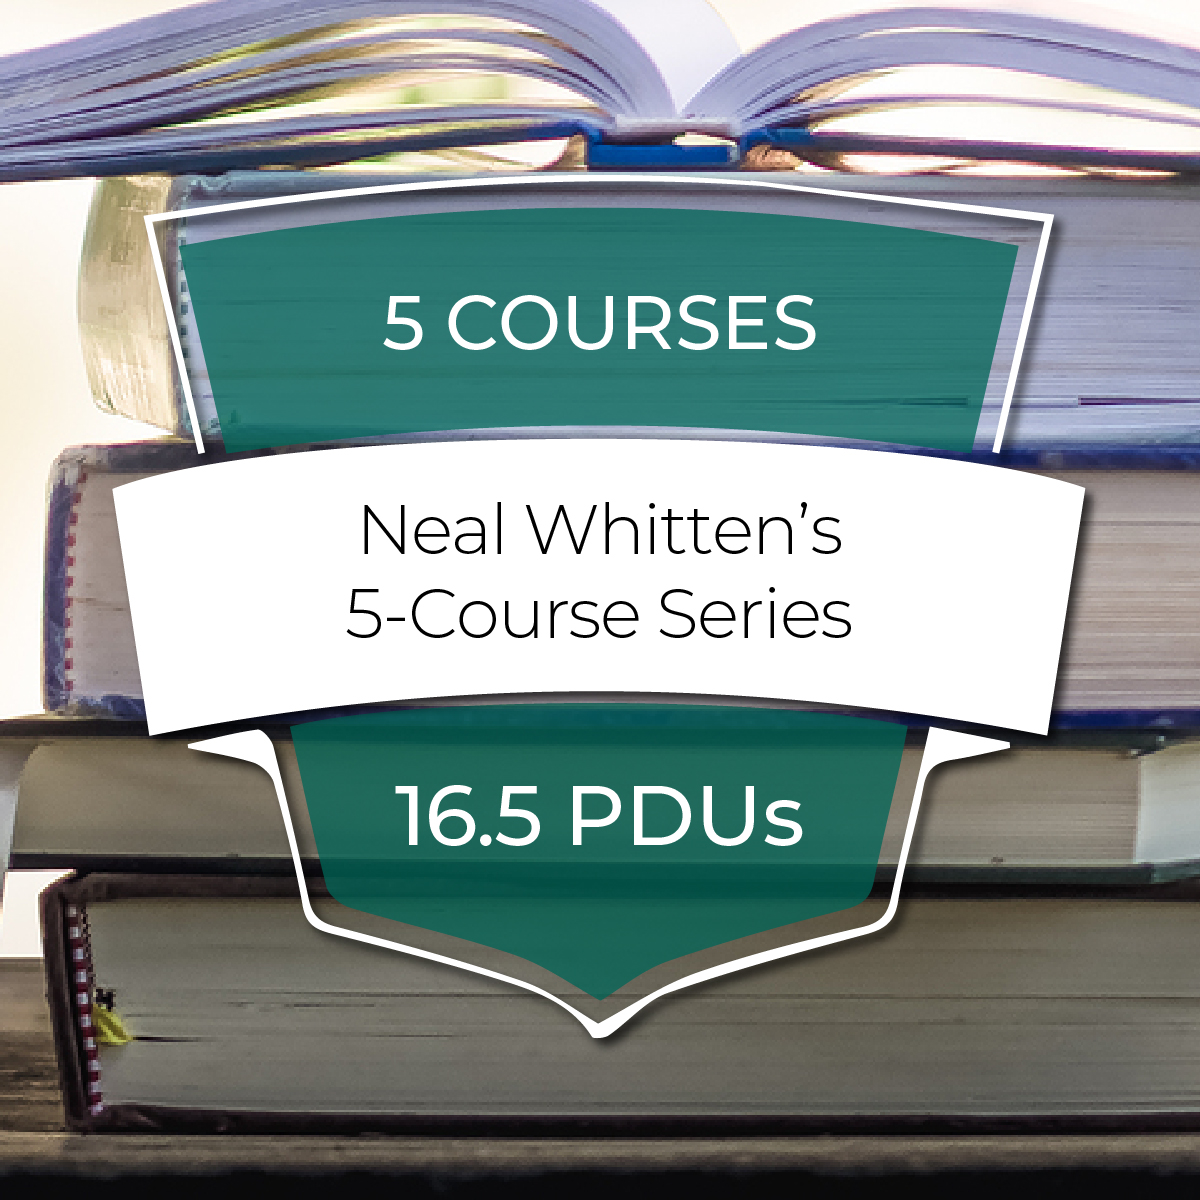 Neal Whitten's 5-Course Series